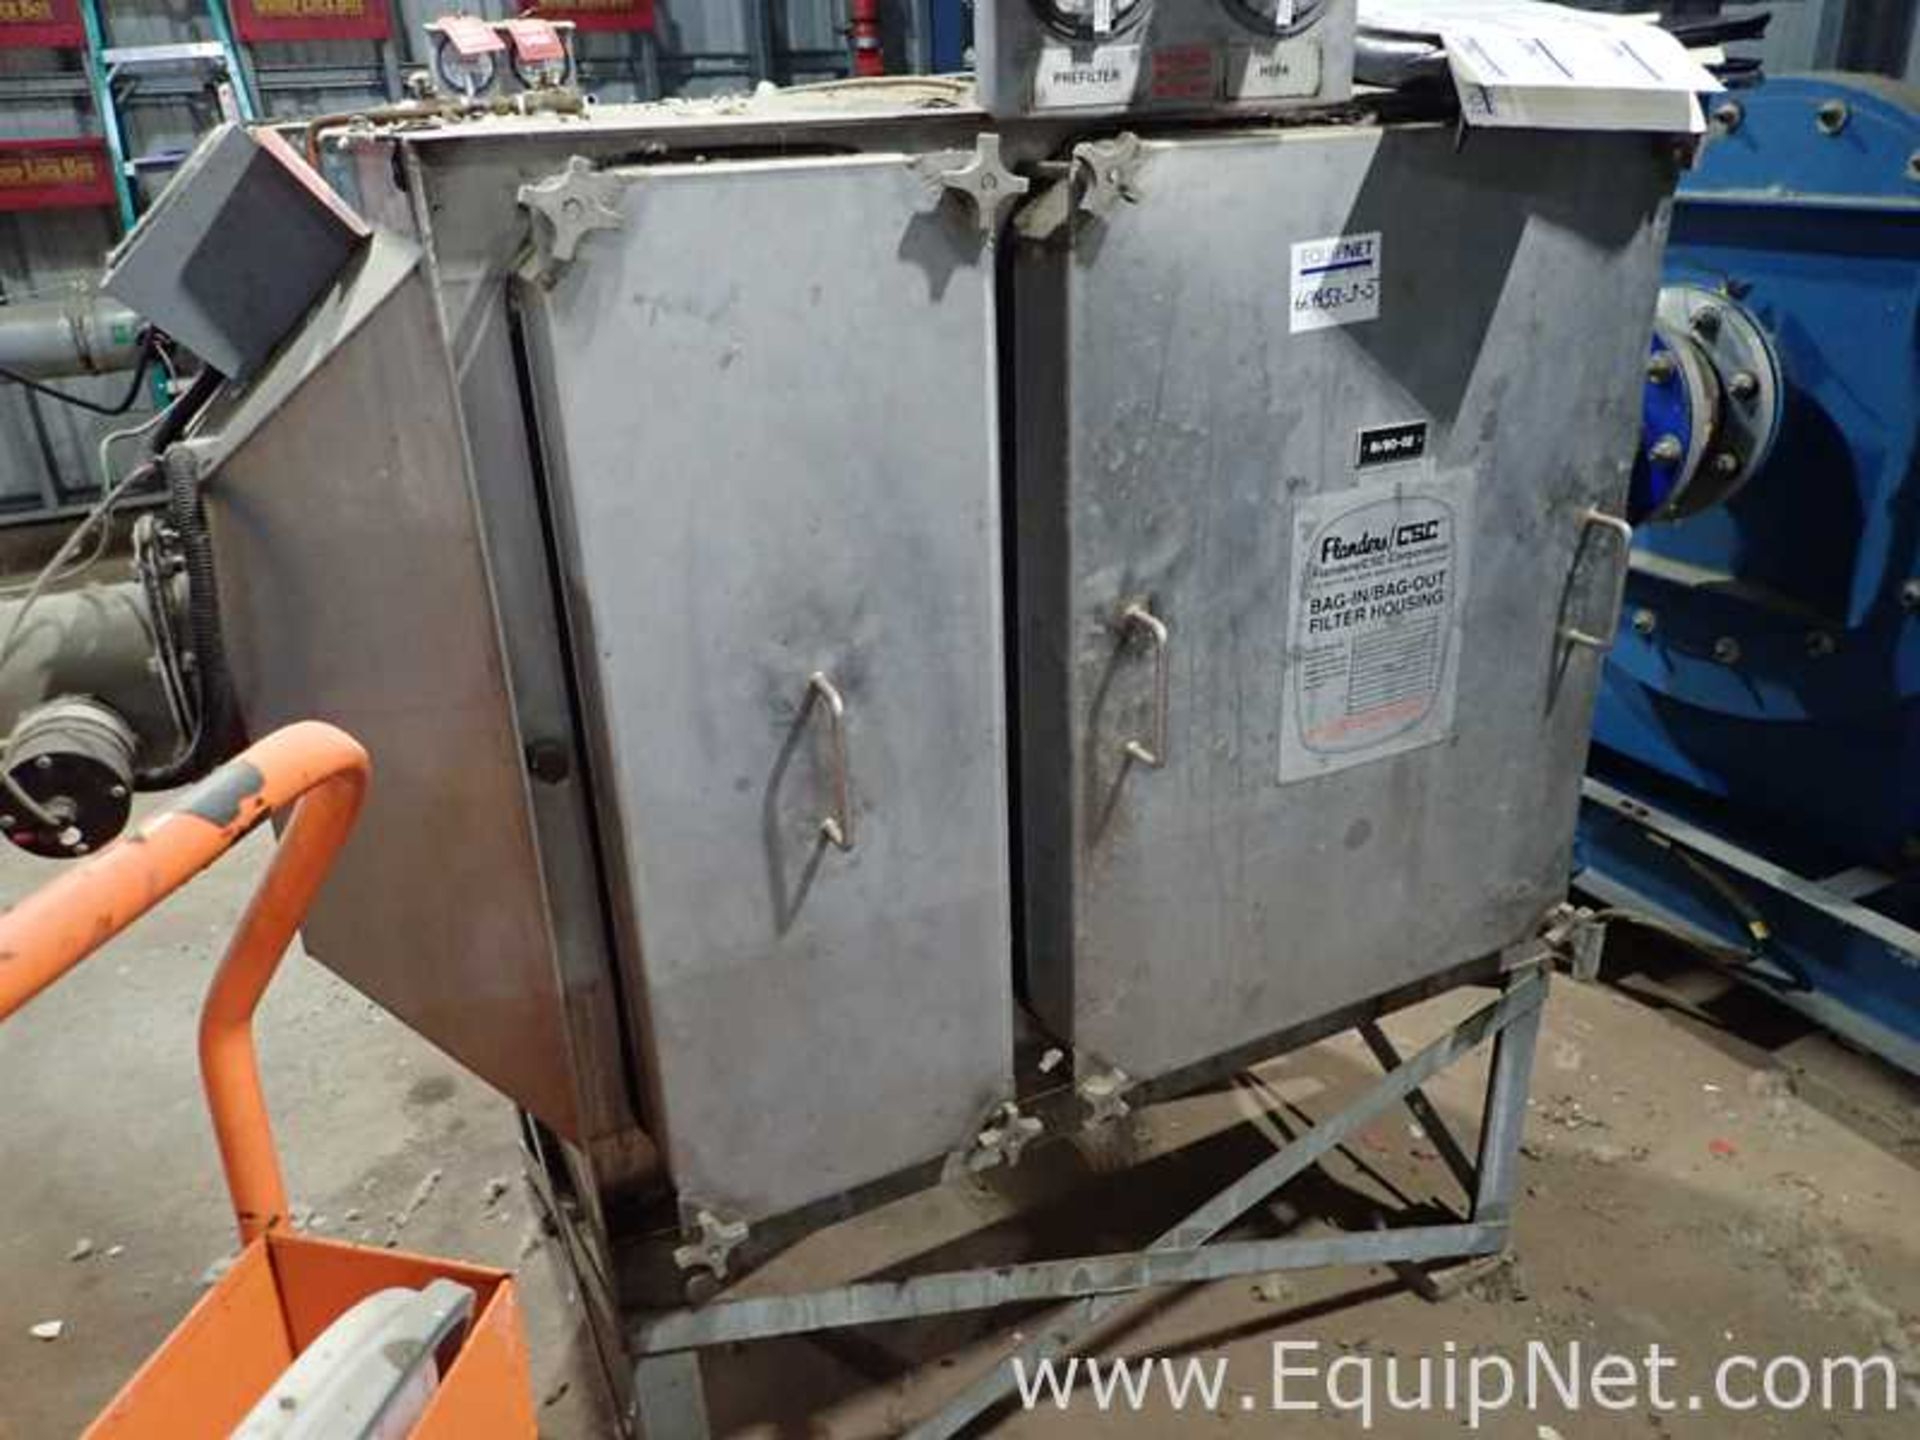 Donaldson Torit DFT 2-4 Dust Collector System - Image 6 of 10